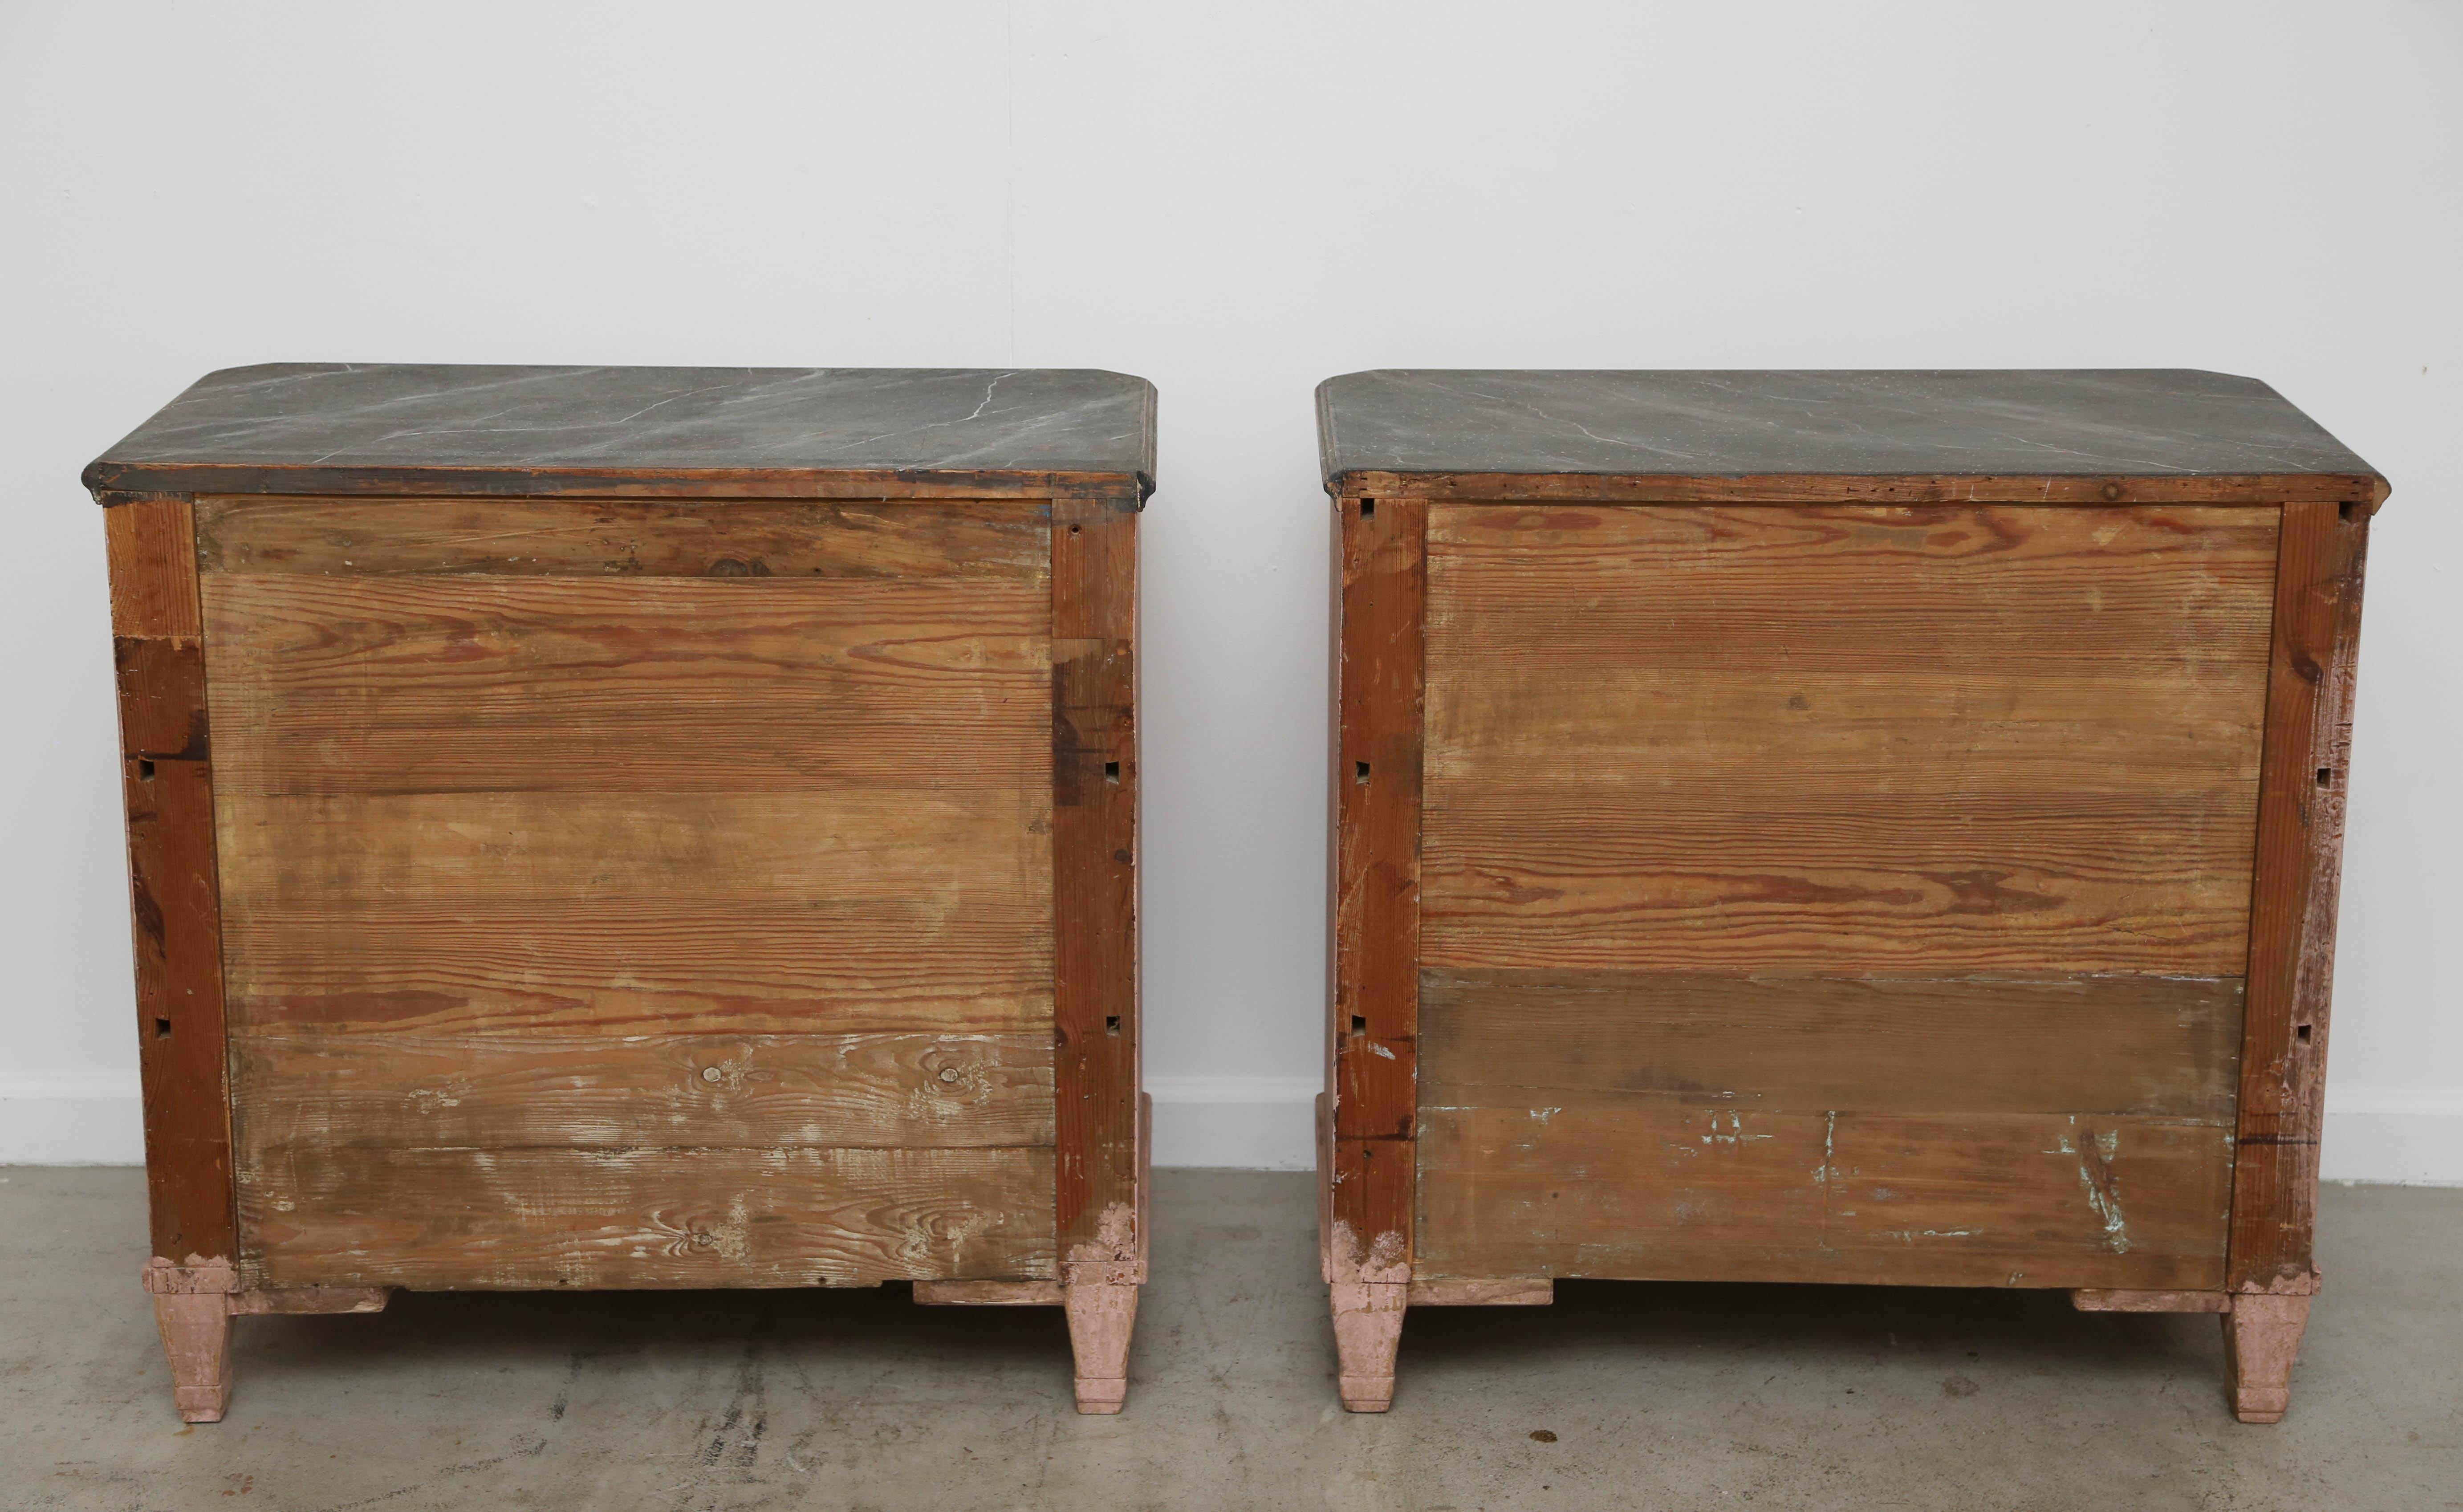 Wood Antique Swedish Gustavian Style Rose Painted Chests with Faux Marble Tops, 